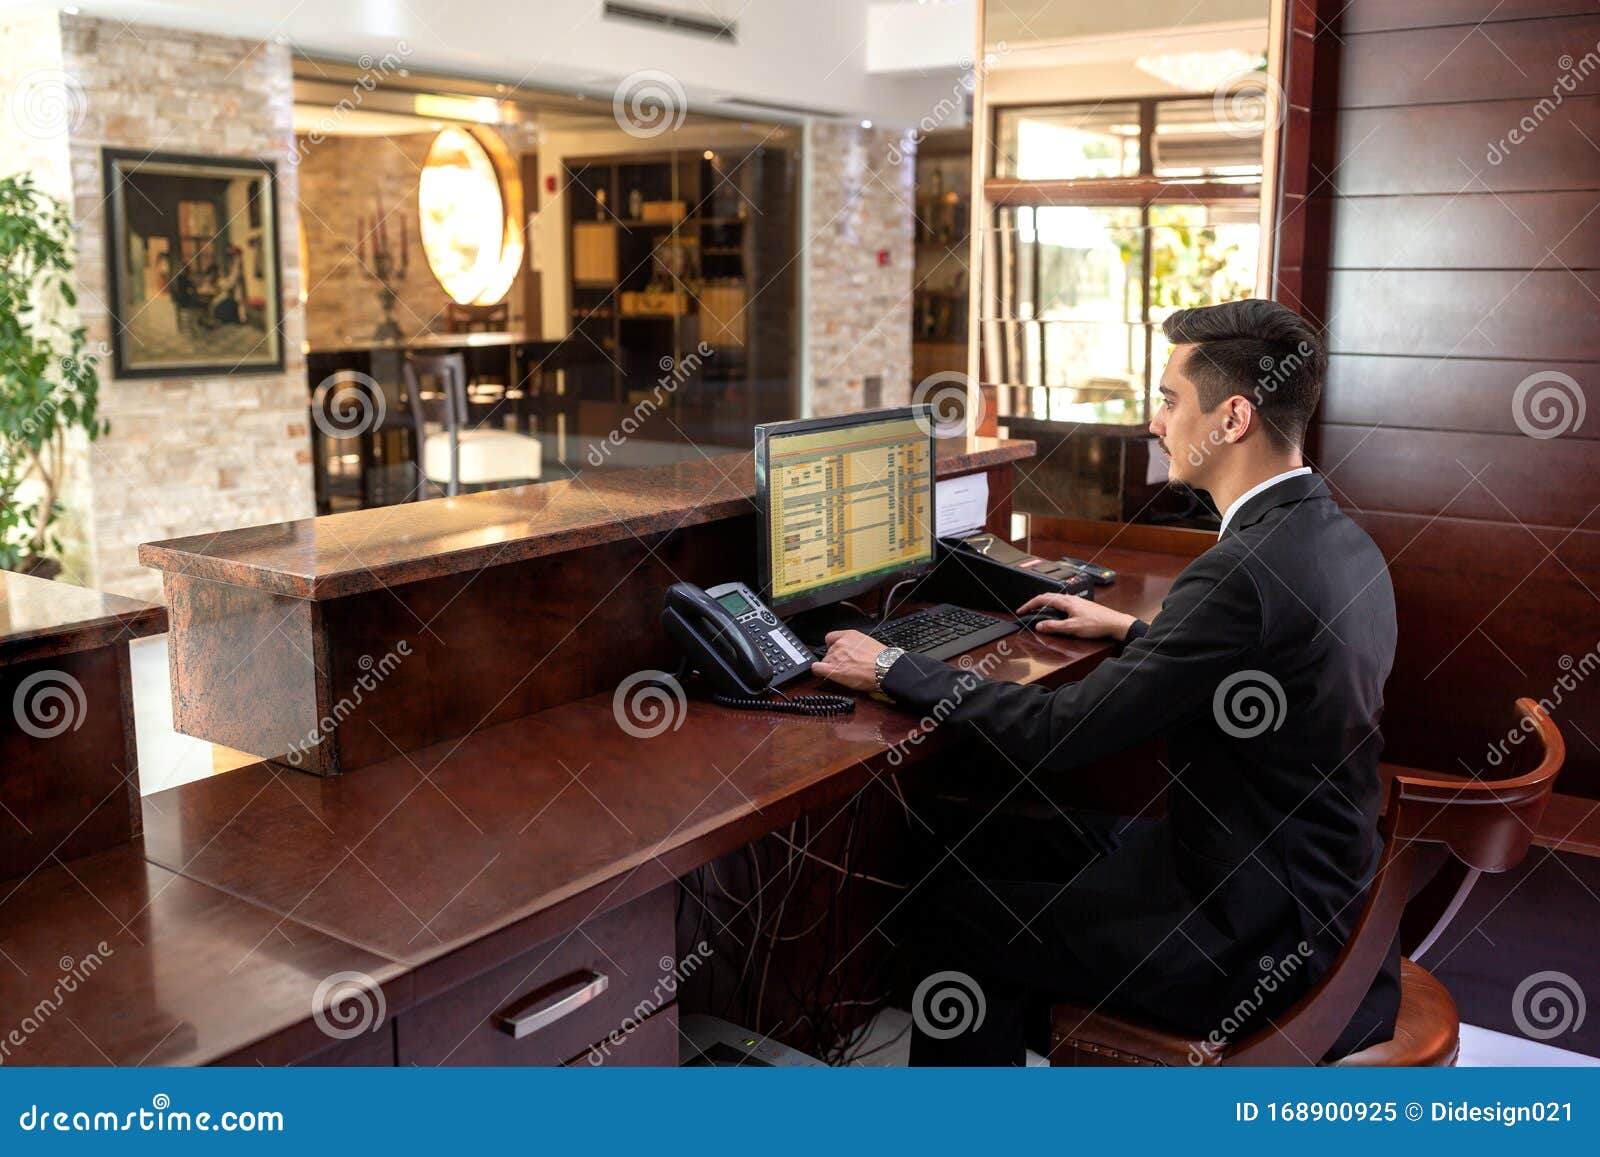 Front Desk Hotel Receptionist Working Stock Image Image Of